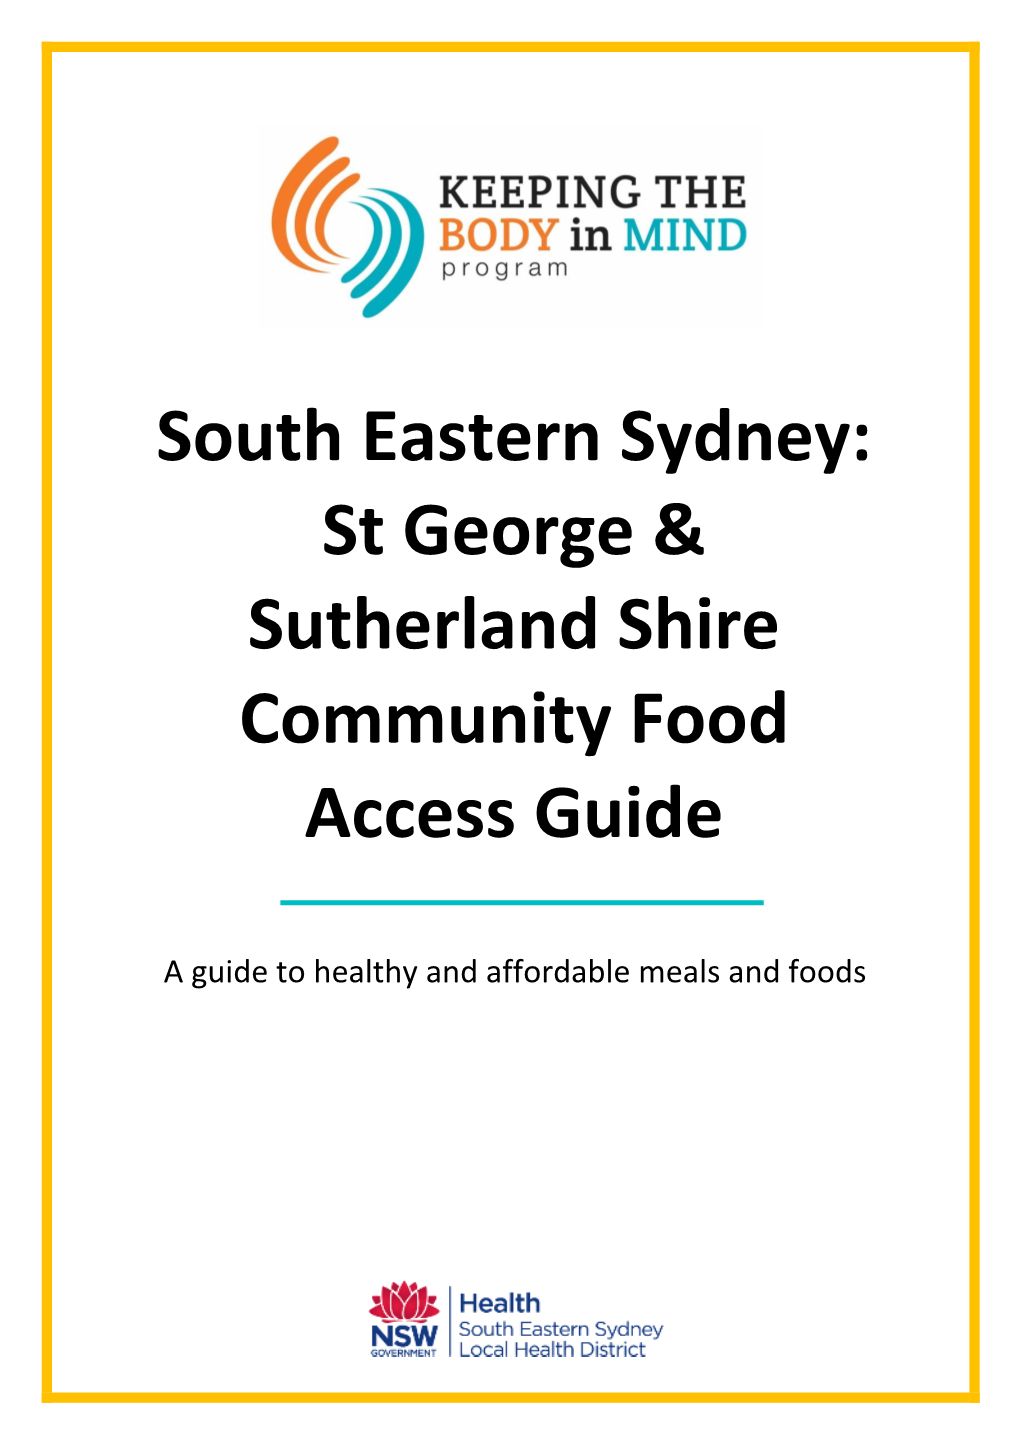 St George & Sutherland Shire Community Food Access Guide